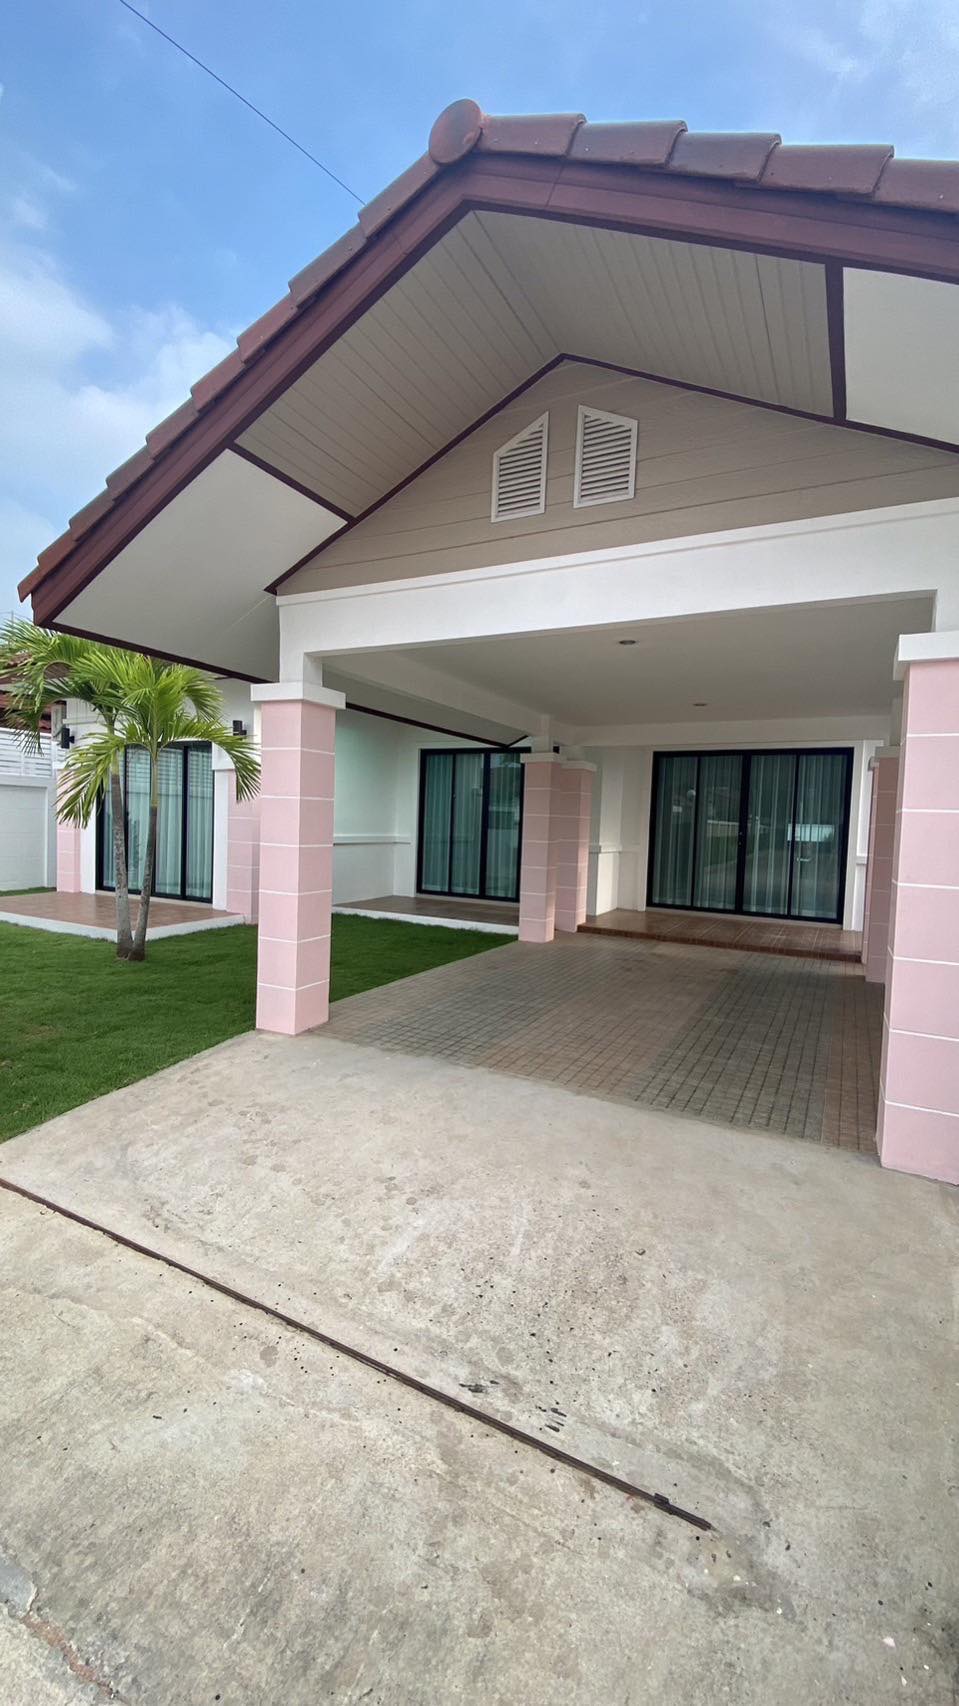 The Bliss 2 Village. 3 bedrooms Detached Pool House in Huai Yai area